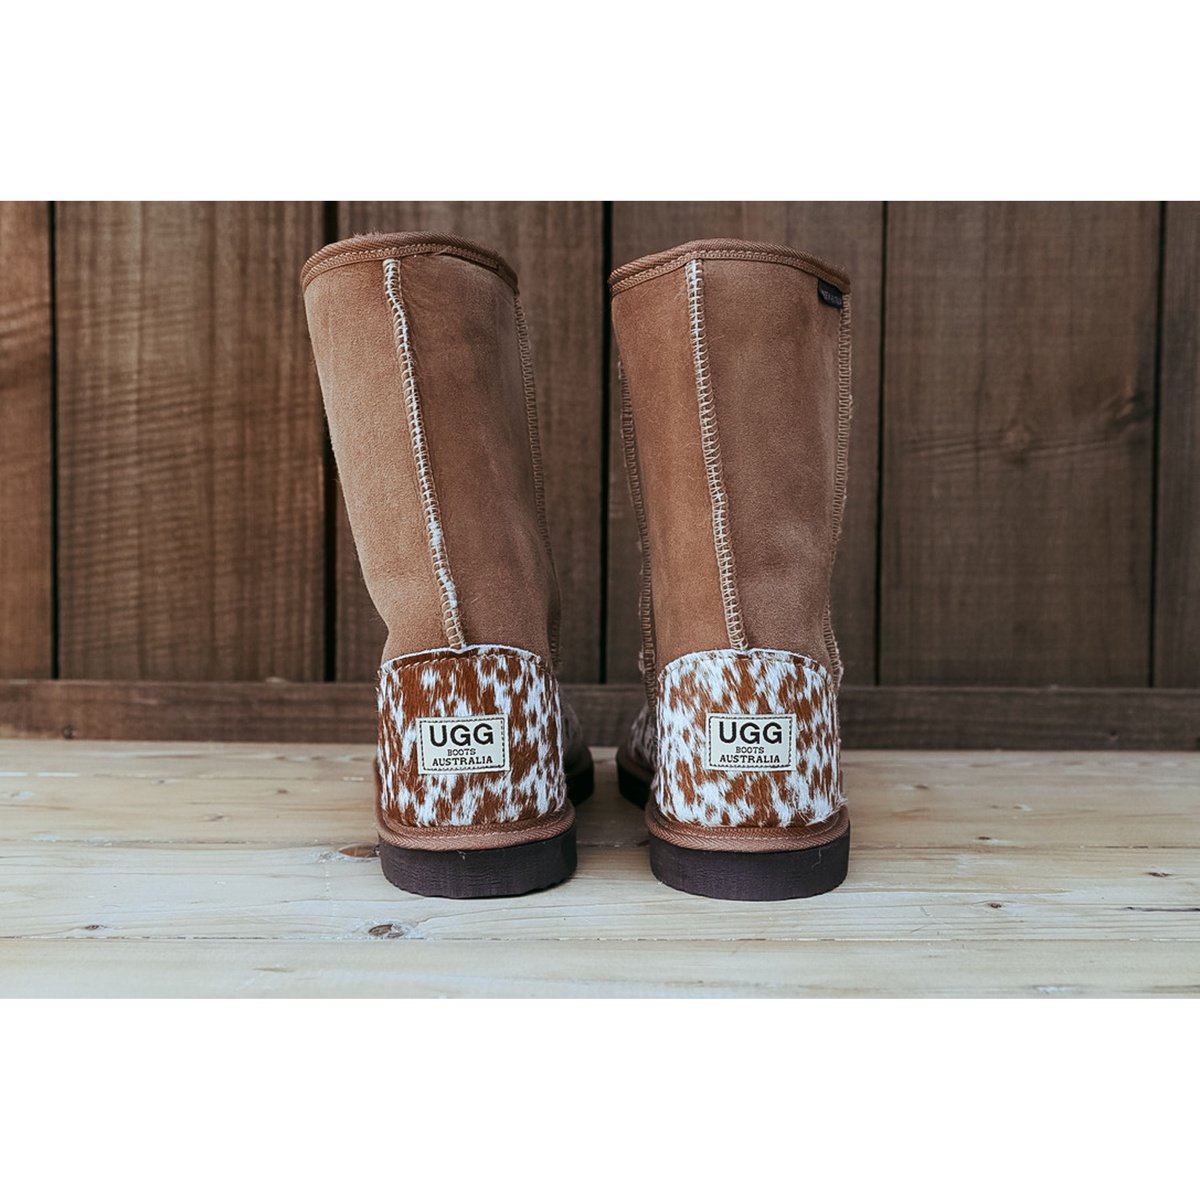 3/4 Classic Ugg Boot - Rawhide Brown and White